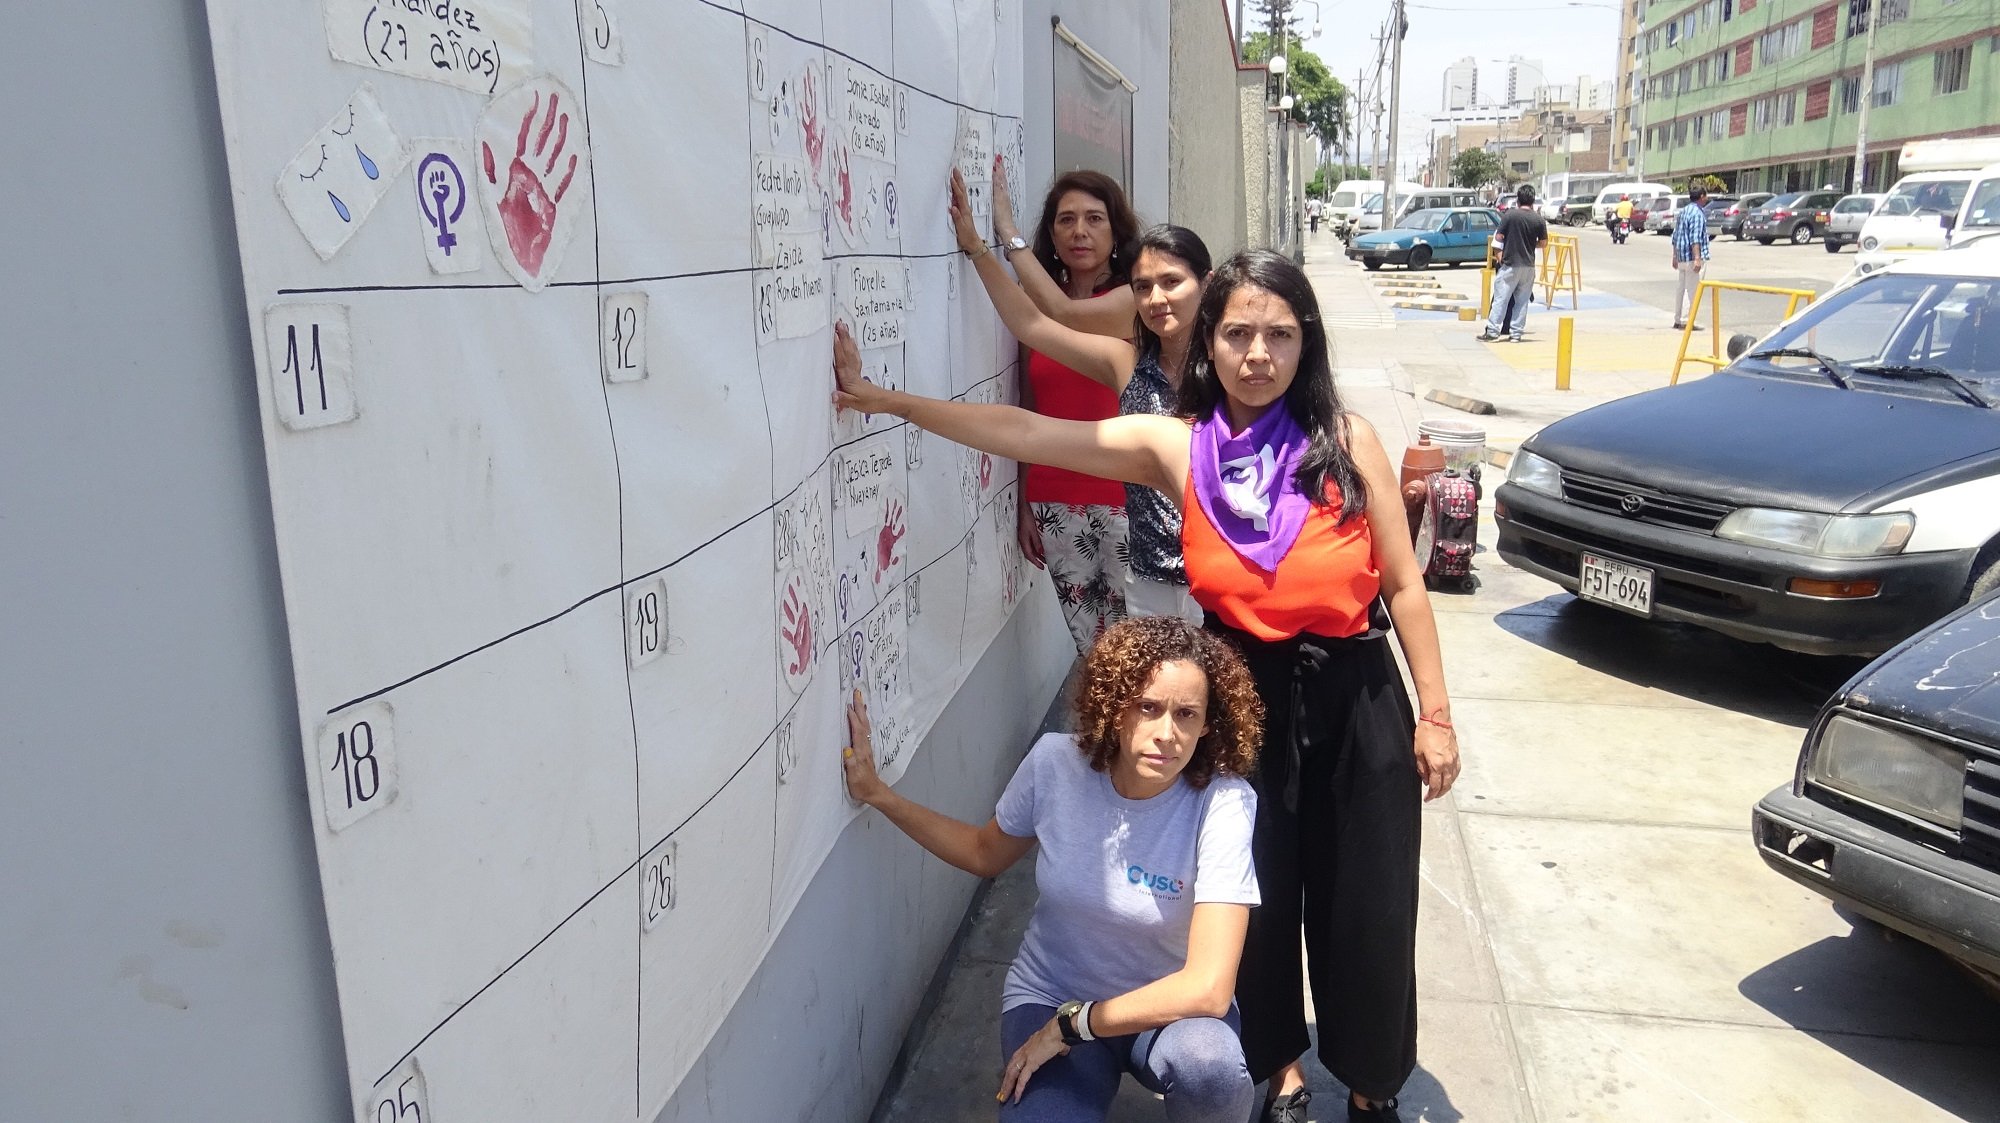 Group of woman putting handprints on large calendar